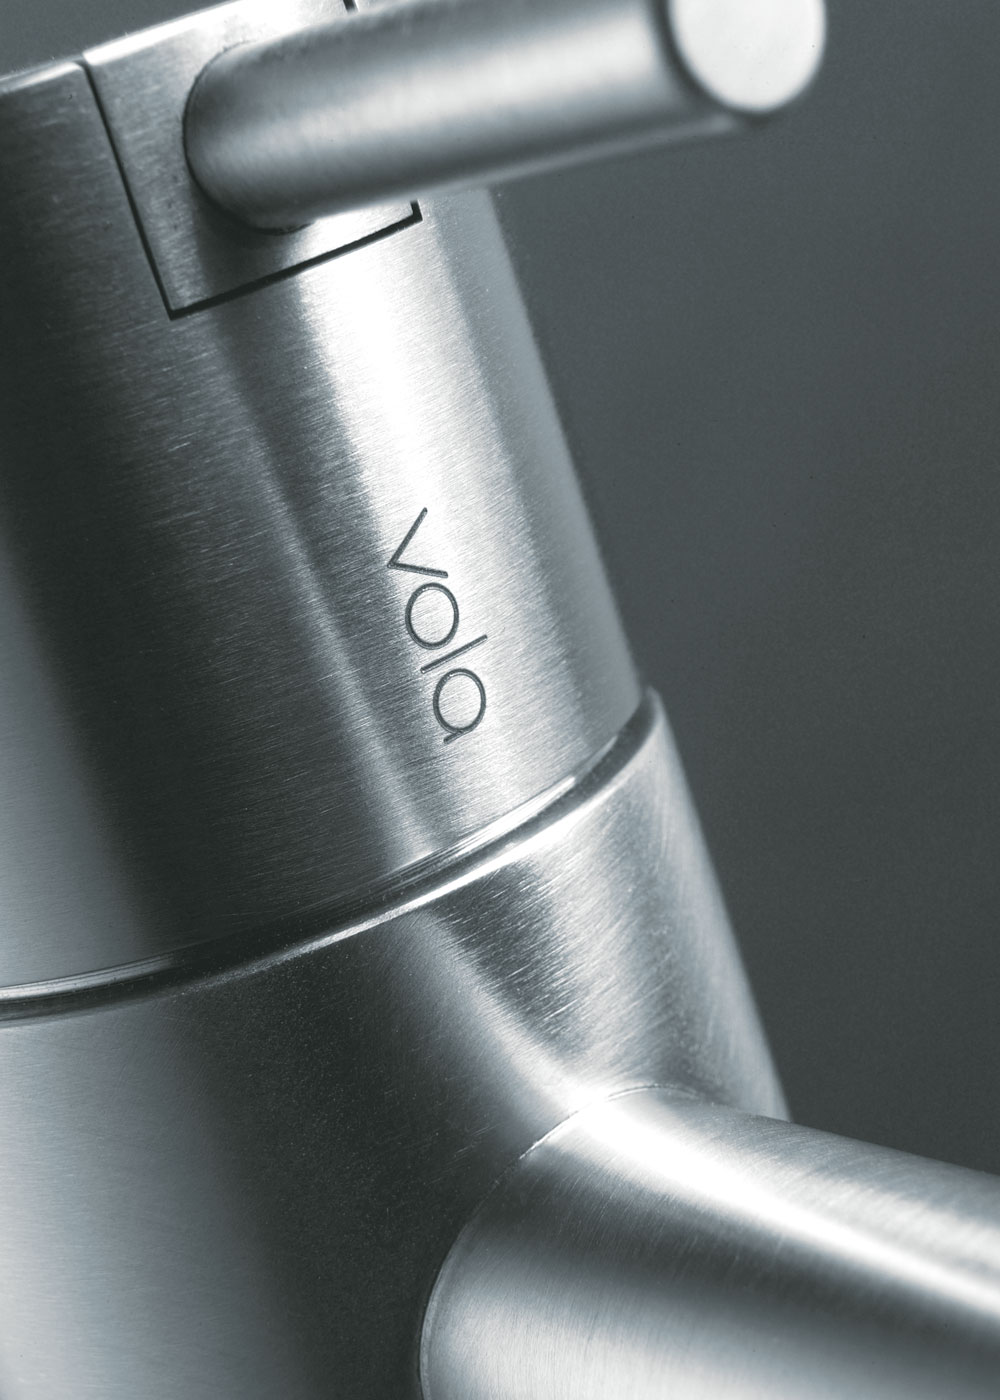 VOLA in stainless steel